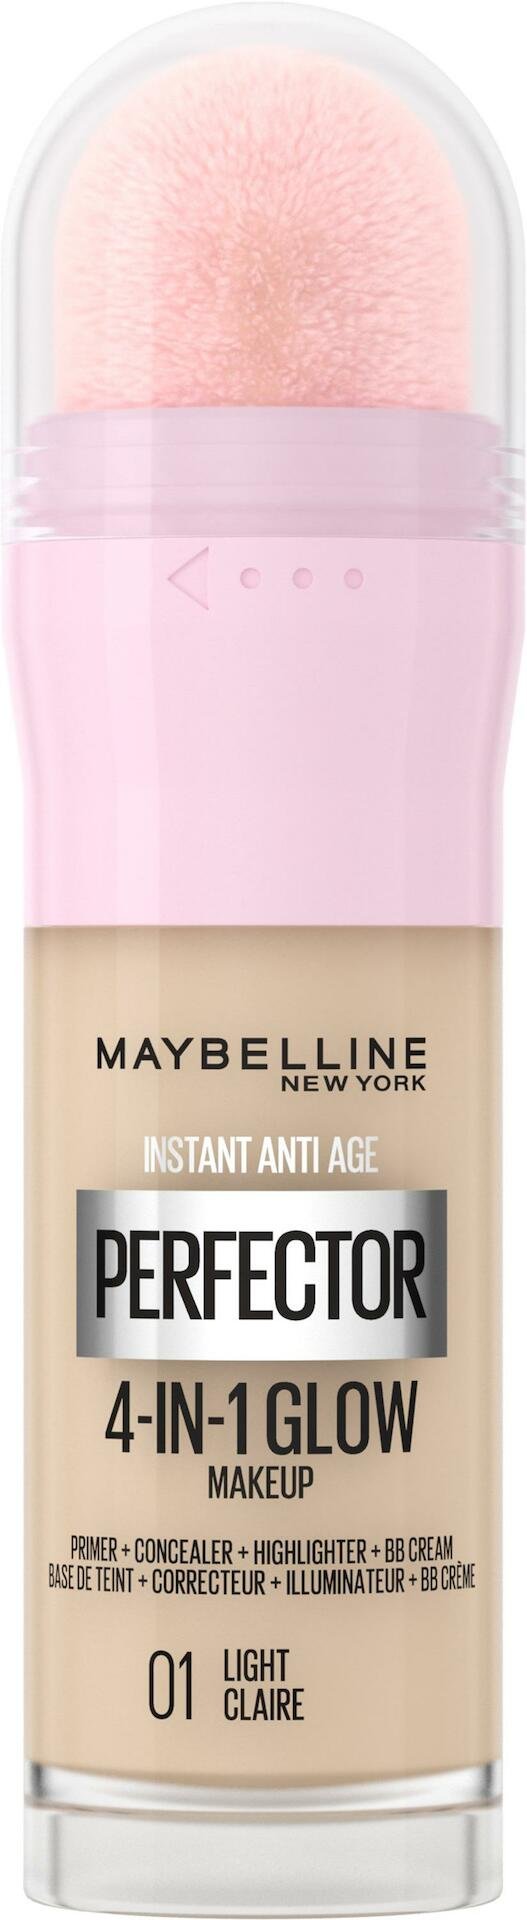 Maybelline New York Instant Perfector 4-in-1 Glow Makeup Foundation 01 Light